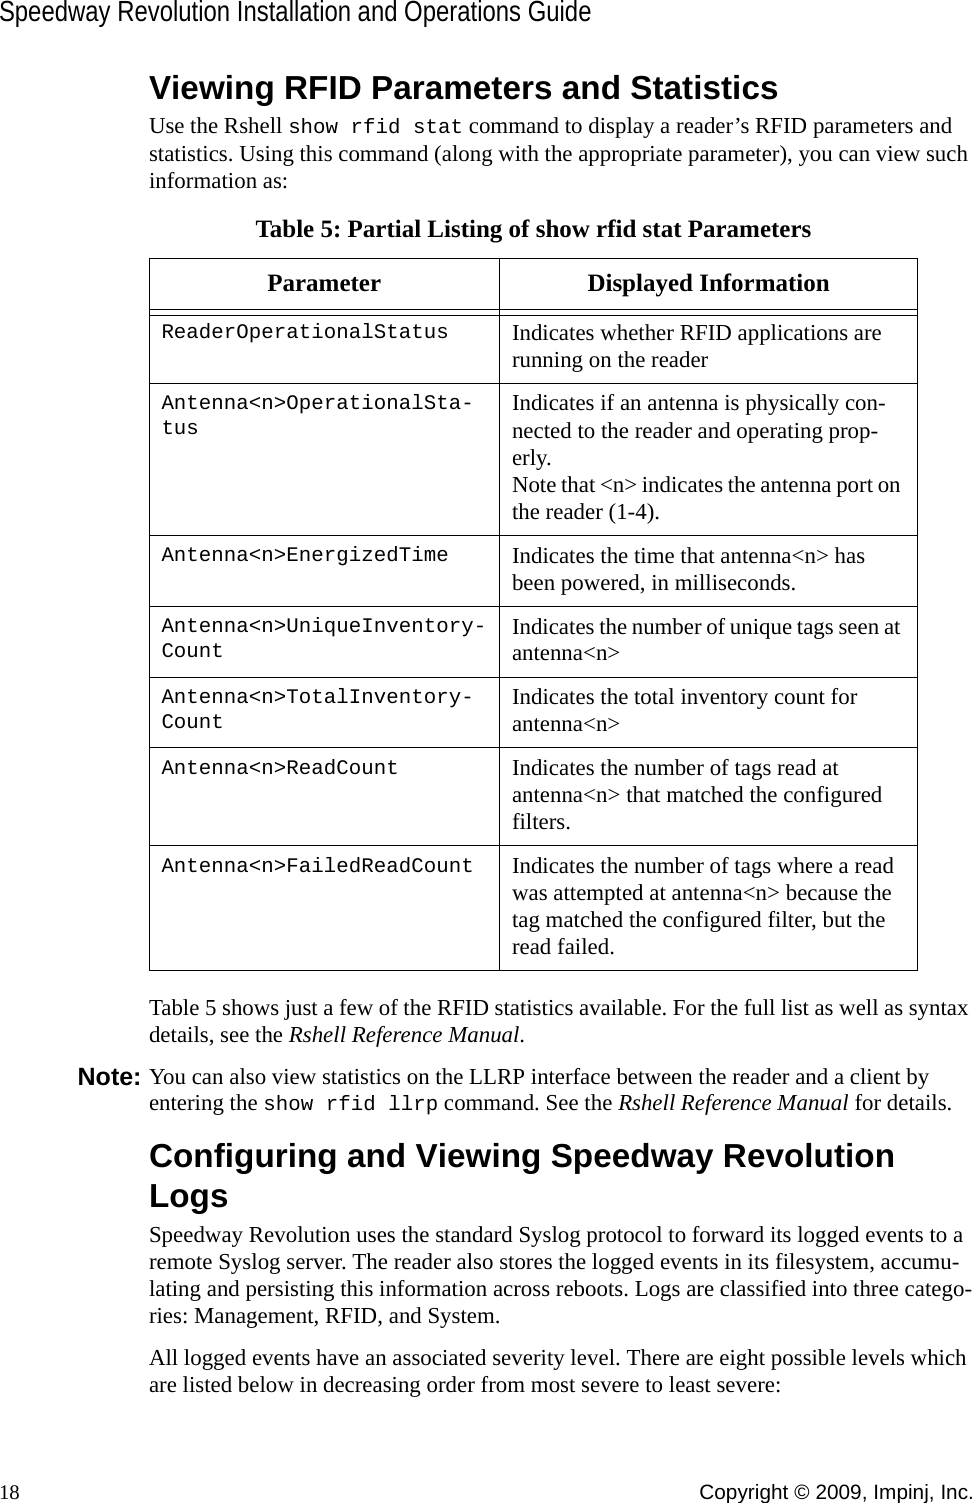 Speedway Revolution Installation and Operations Guide18 Copyright © 2009, Impinj, Inc.Viewing RFID Parameters and StatisticsUse the Rshell show rfid stat command to display a reader’s RFID parameters and statistics. Using this command (along with the appropriate parameter), you can view such information as:Table 5 shows just a few of the RFID statistics available. For the full list as well as syntax details, see the Rshell Reference Manual.Note: You can also view statistics on the LLRP interface between the reader and a client by entering the show rfid llrp command. See the Rshell Reference Manual for details.Configuring and Viewing Speedway Revolution LogsSpeedway Revolution uses the standard Syslog protocol to forward its logged events to a remote Syslog server. The reader also stores the logged events in its filesystem, accumu-lating and persisting this information across reboots. Logs are classified into three catego-ries: Management, RFID, and System.All logged events have an associated severity level. There are eight possible levels which are listed below in decreasing order from most severe to least severe:Table 5: Partial Listing of show rfid stat ParametersParameter Displayed InformationReaderOperationalStatus Indicates whether RFID applications are running on the readerAntenna&lt;n&gt;OperationalSta-tusIndicates if an antenna is physically con-nected to the reader and operating prop-erly. Note that &lt;n&gt; indicates the antenna port on the reader (1-4).Antenna&lt;n&gt;EnergizedTime Indicates the time that antenna&lt;n&gt; has been powered, in milliseconds.Antenna&lt;n&gt;UniqueInventory-CountIndicates the number of unique tags seen at antenna&lt;n&gt;Antenna&lt;n&gt;TotalInventory-CountIndicates the total inventory count for antenna&lt;n&gt;Antenna&lt;n&gt;ReadCount Indicates the number of tags read at antenna&lt;n&gt; that matched the configured filters.Antenna&lt;n&gt;FailedReadCount Indicates the number of tags where a read was attempted at antenna&lt;n&gt; because the tag matched the configured filter, but the read failed.